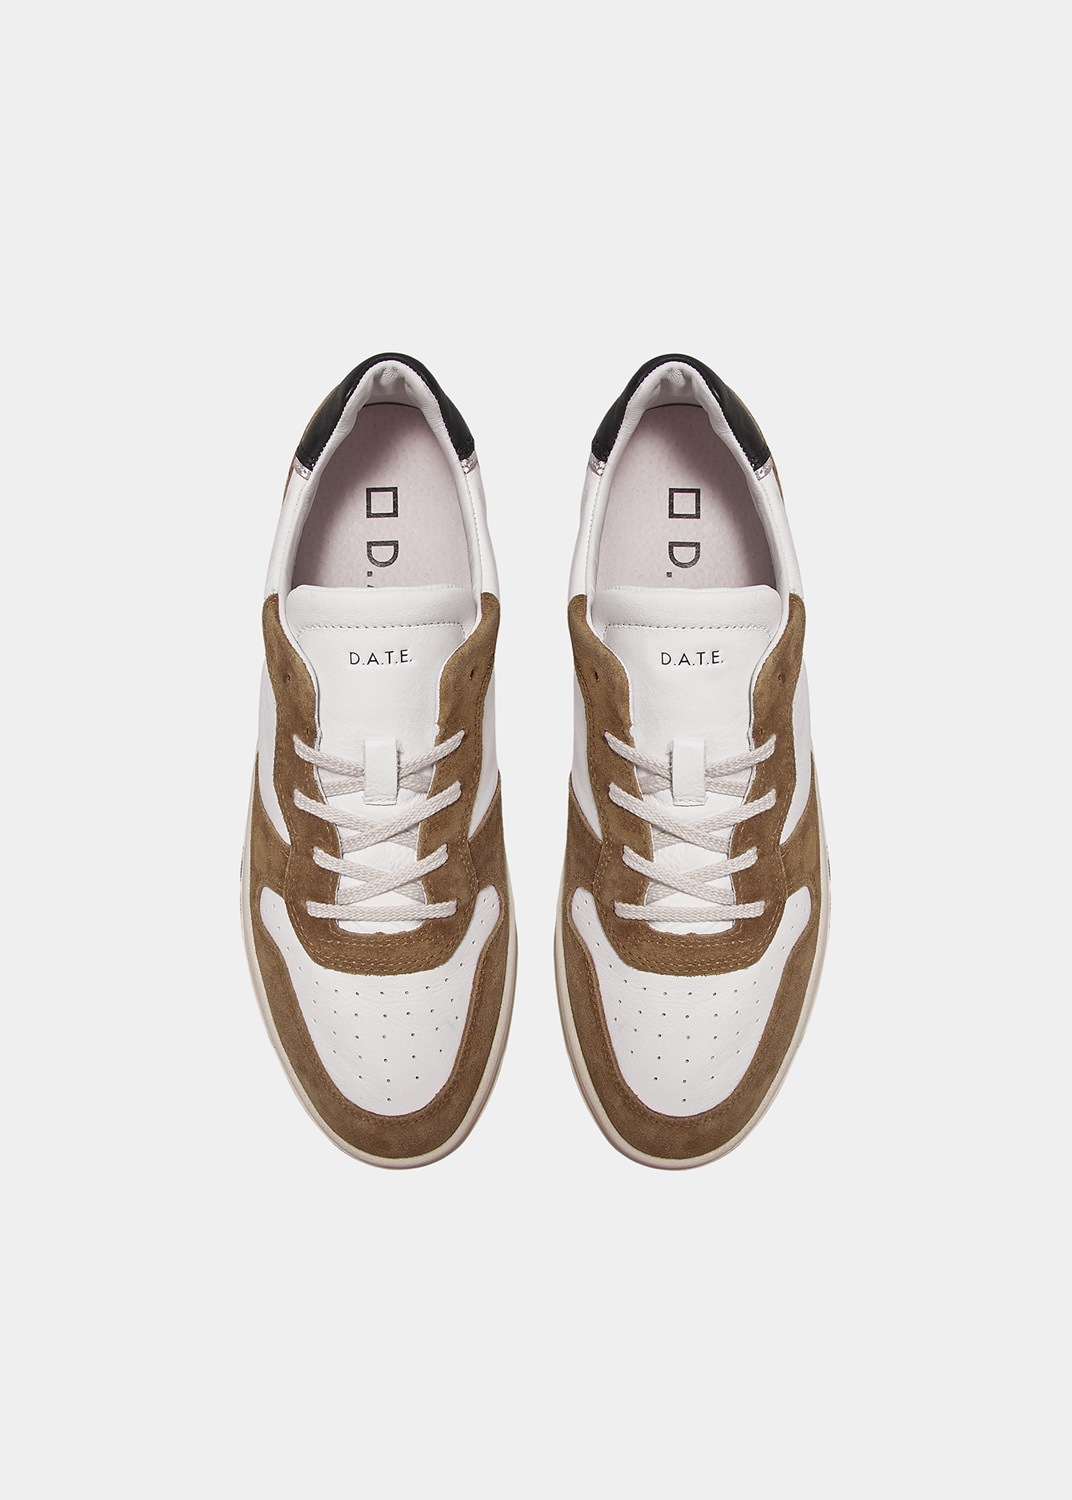 D.A.T.E.: COURT LEATHER WHITE-CAMEL